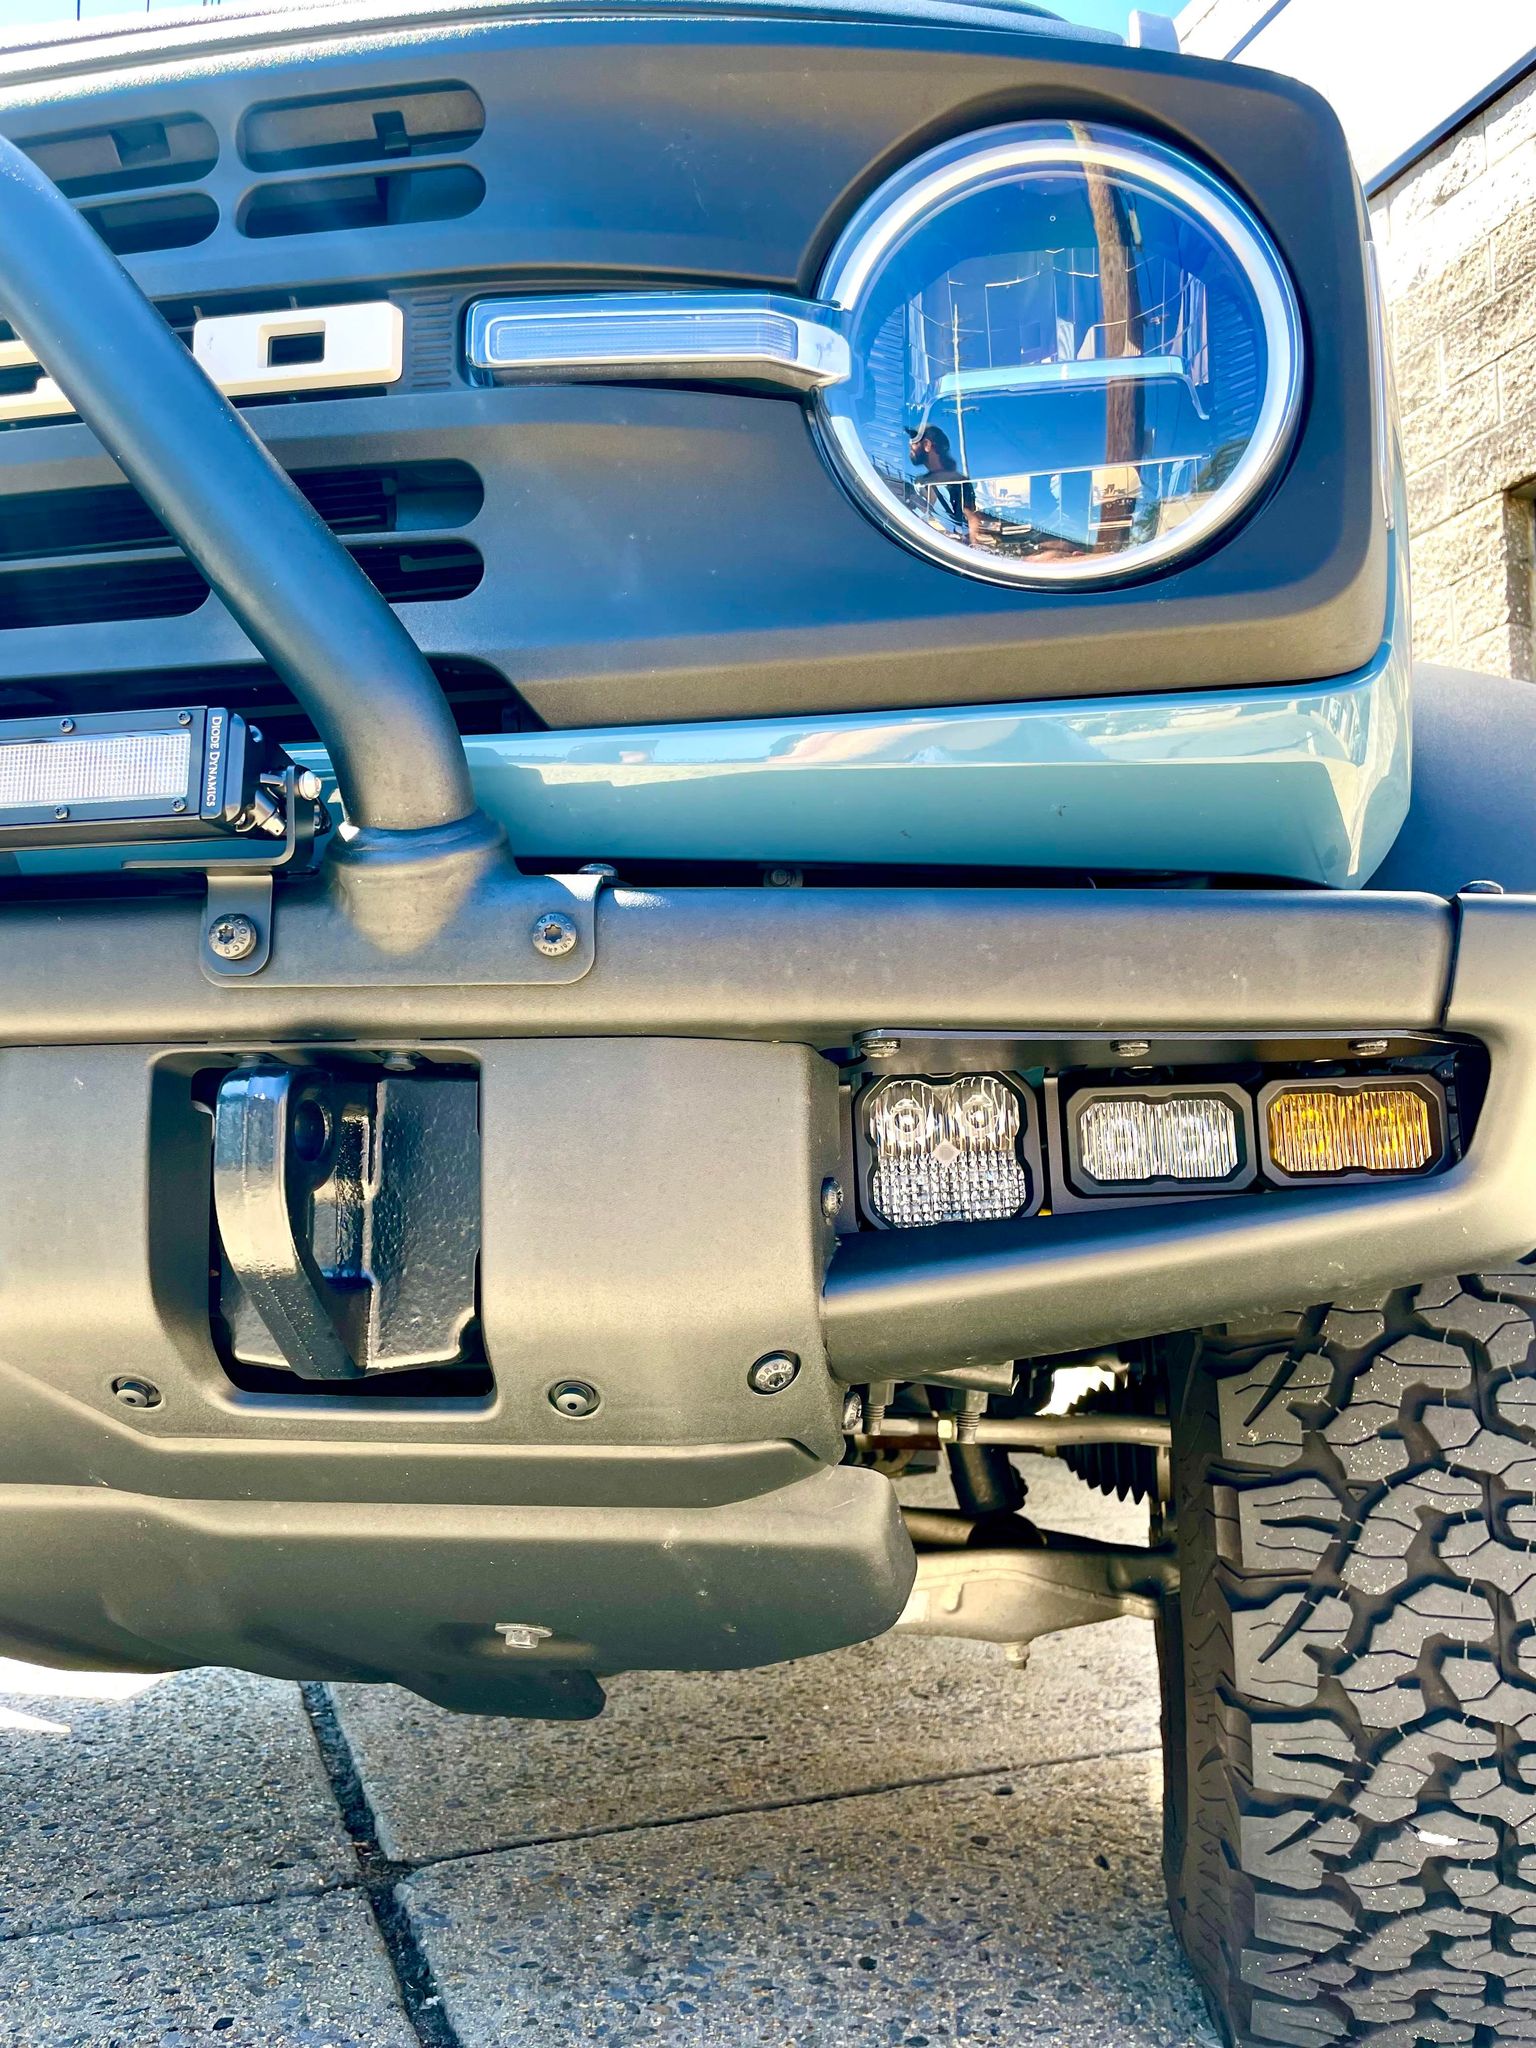 Ford Bronco Looking for good fog light option for modular bumper with yellow & white options 305449976_491269192392242_8483762161279700545_n